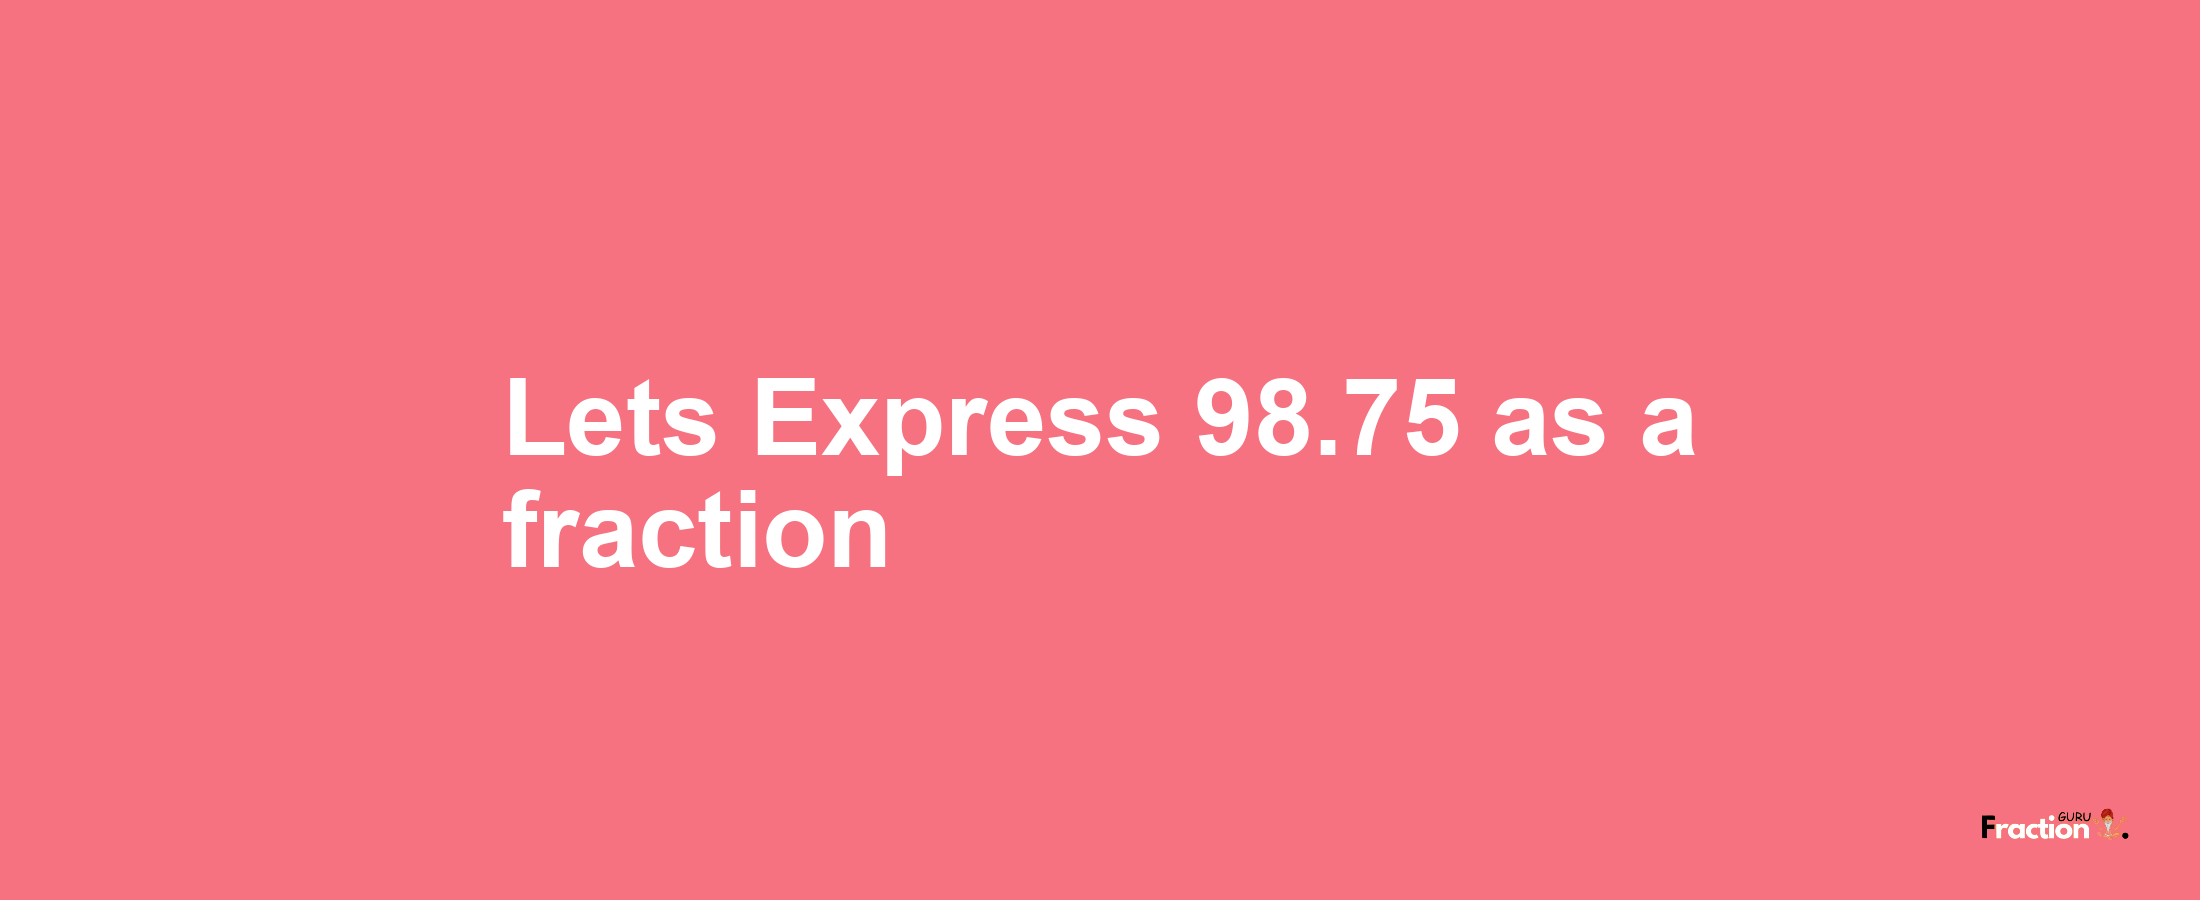 Lets Express 98.75 as afraction